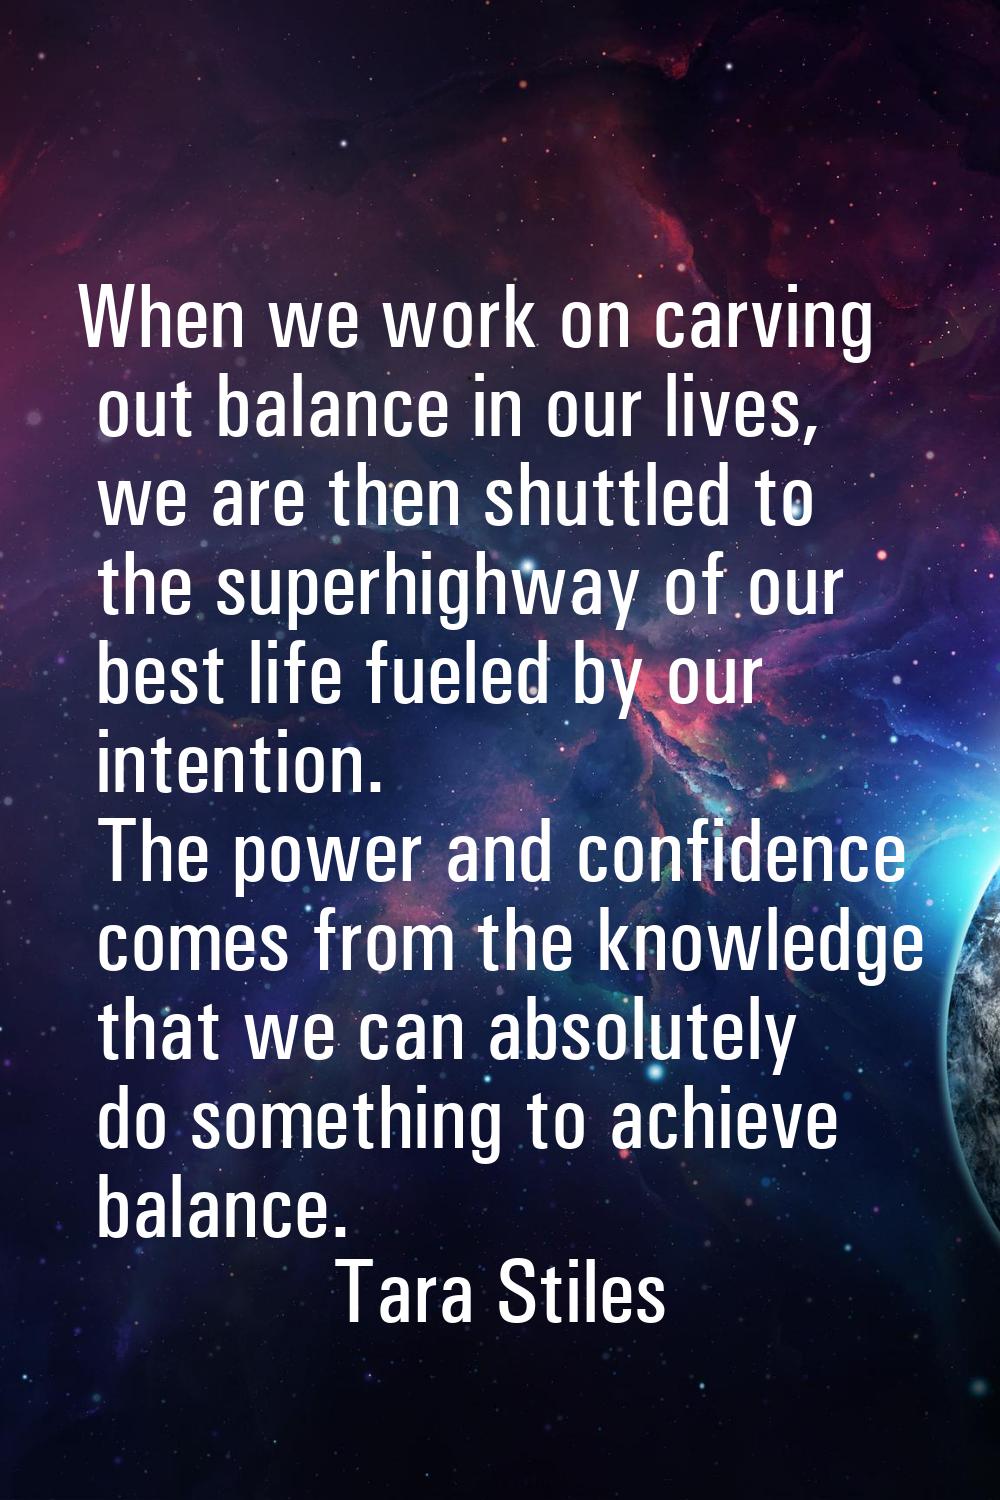 When we work on carving out balance in our lives, we are then shuttled to the superhighway of our b